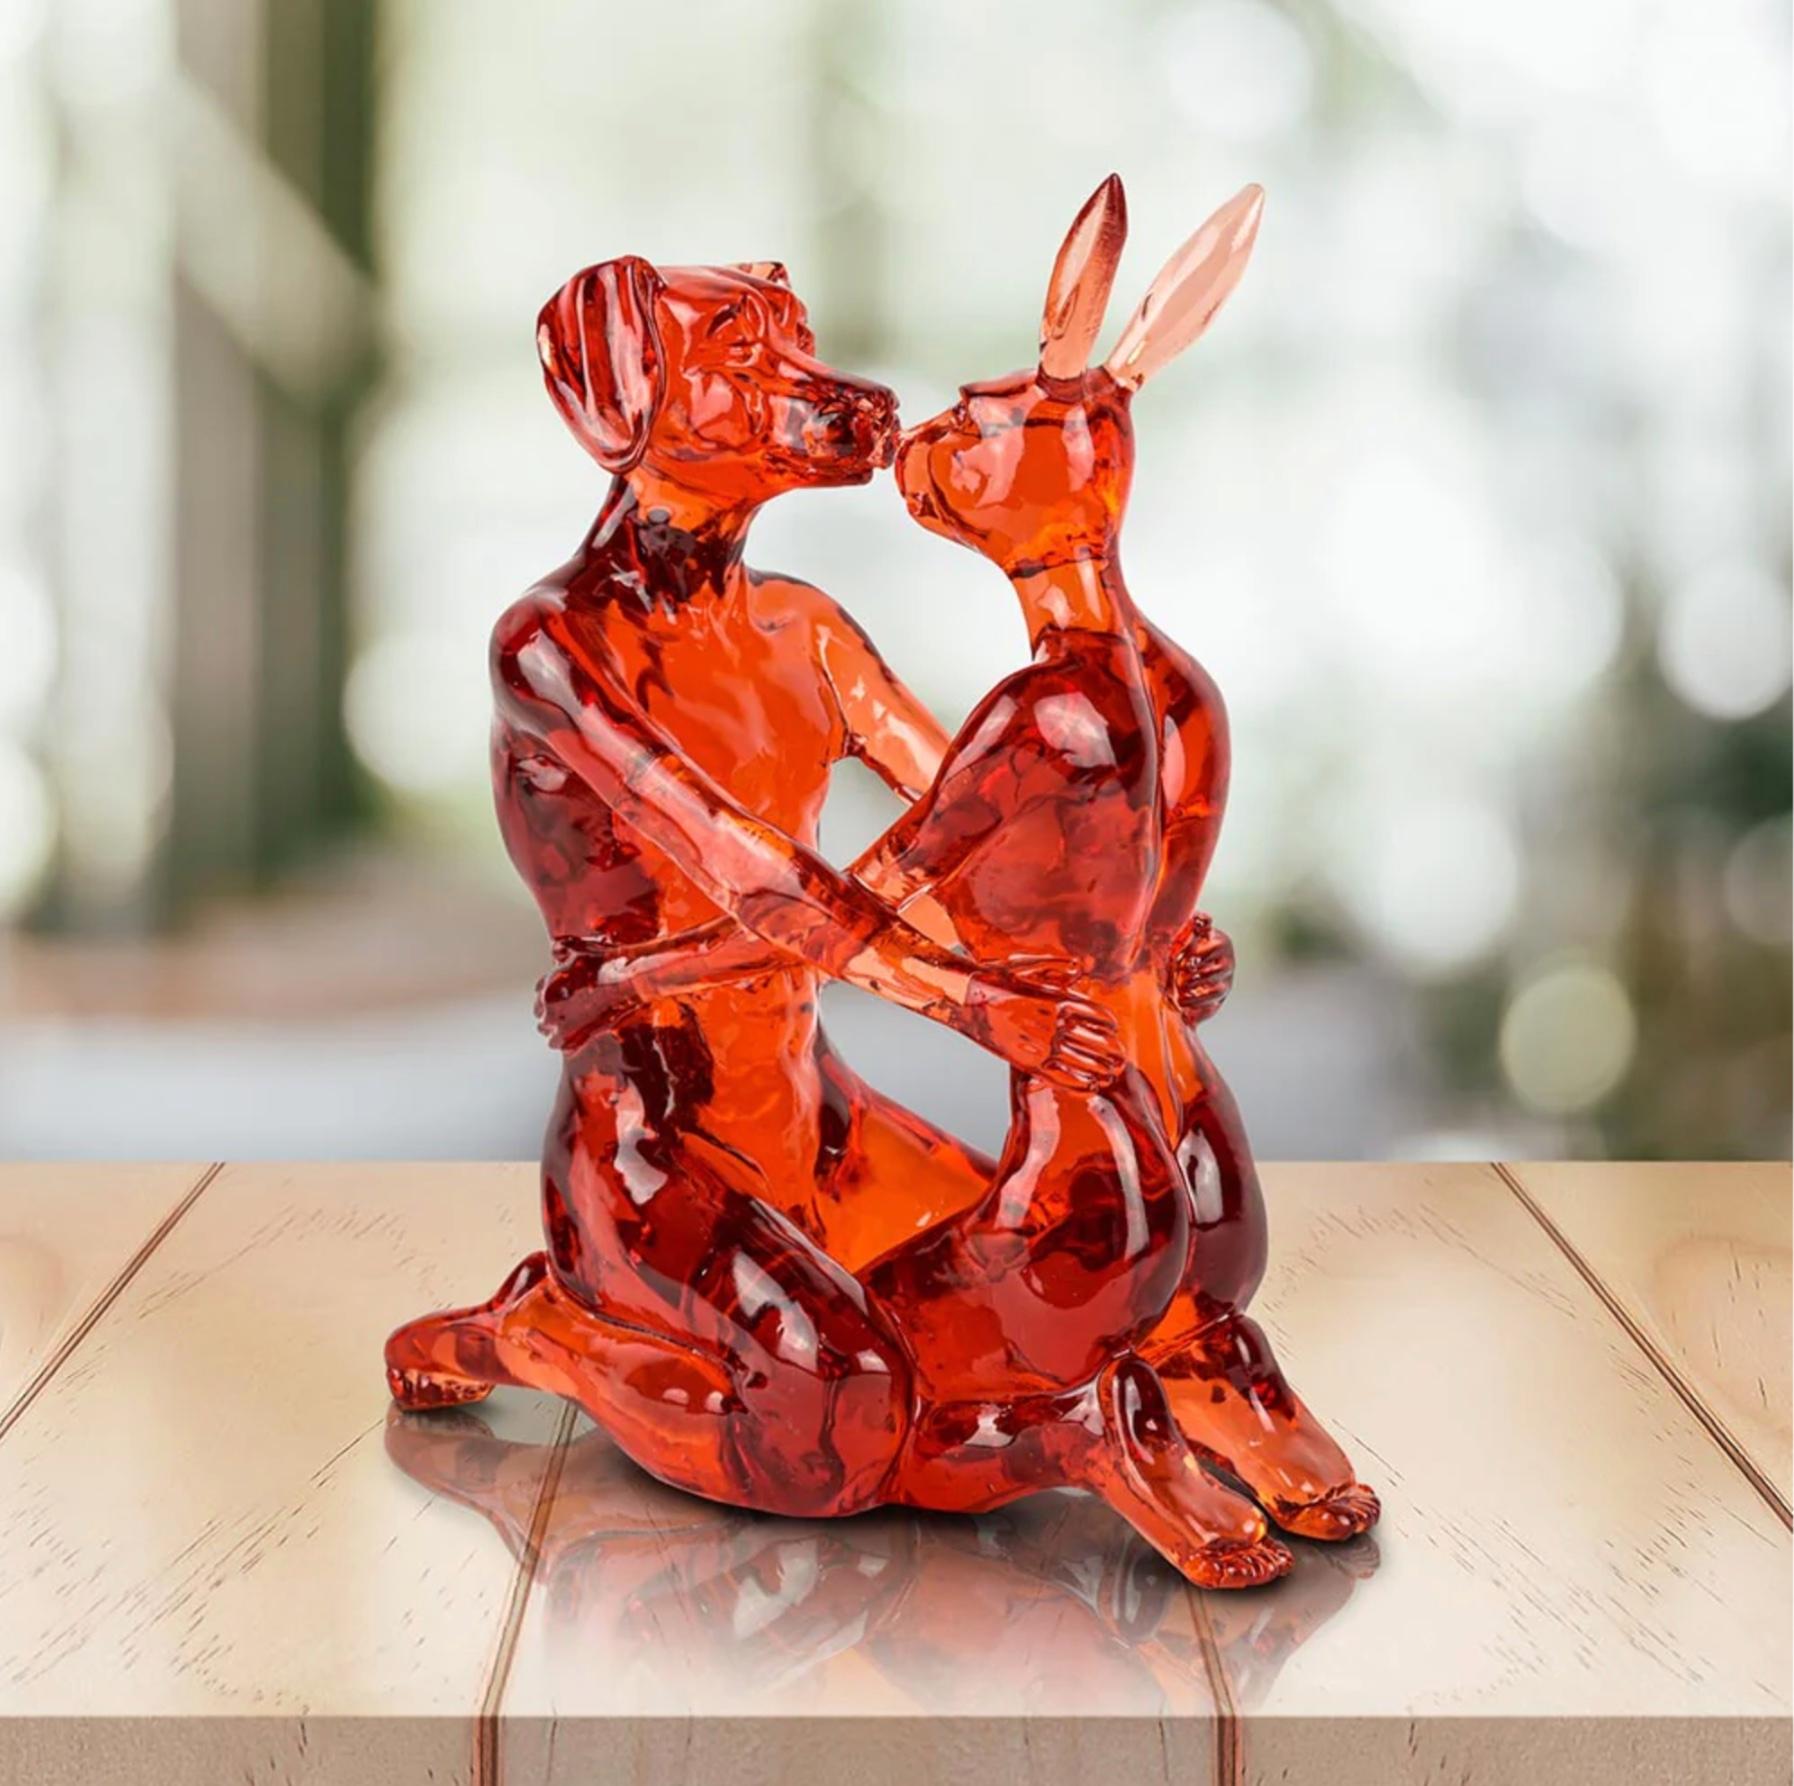 Title: They Were the Best Lolly Kissers (Red)
Authentic Resin Sculpture

This authentic bronze sculpture titled 'They Were the Best Lolly Kissers' in Red by artists Gillie and Marc has been meticulously crafted in resin. This sculpture features